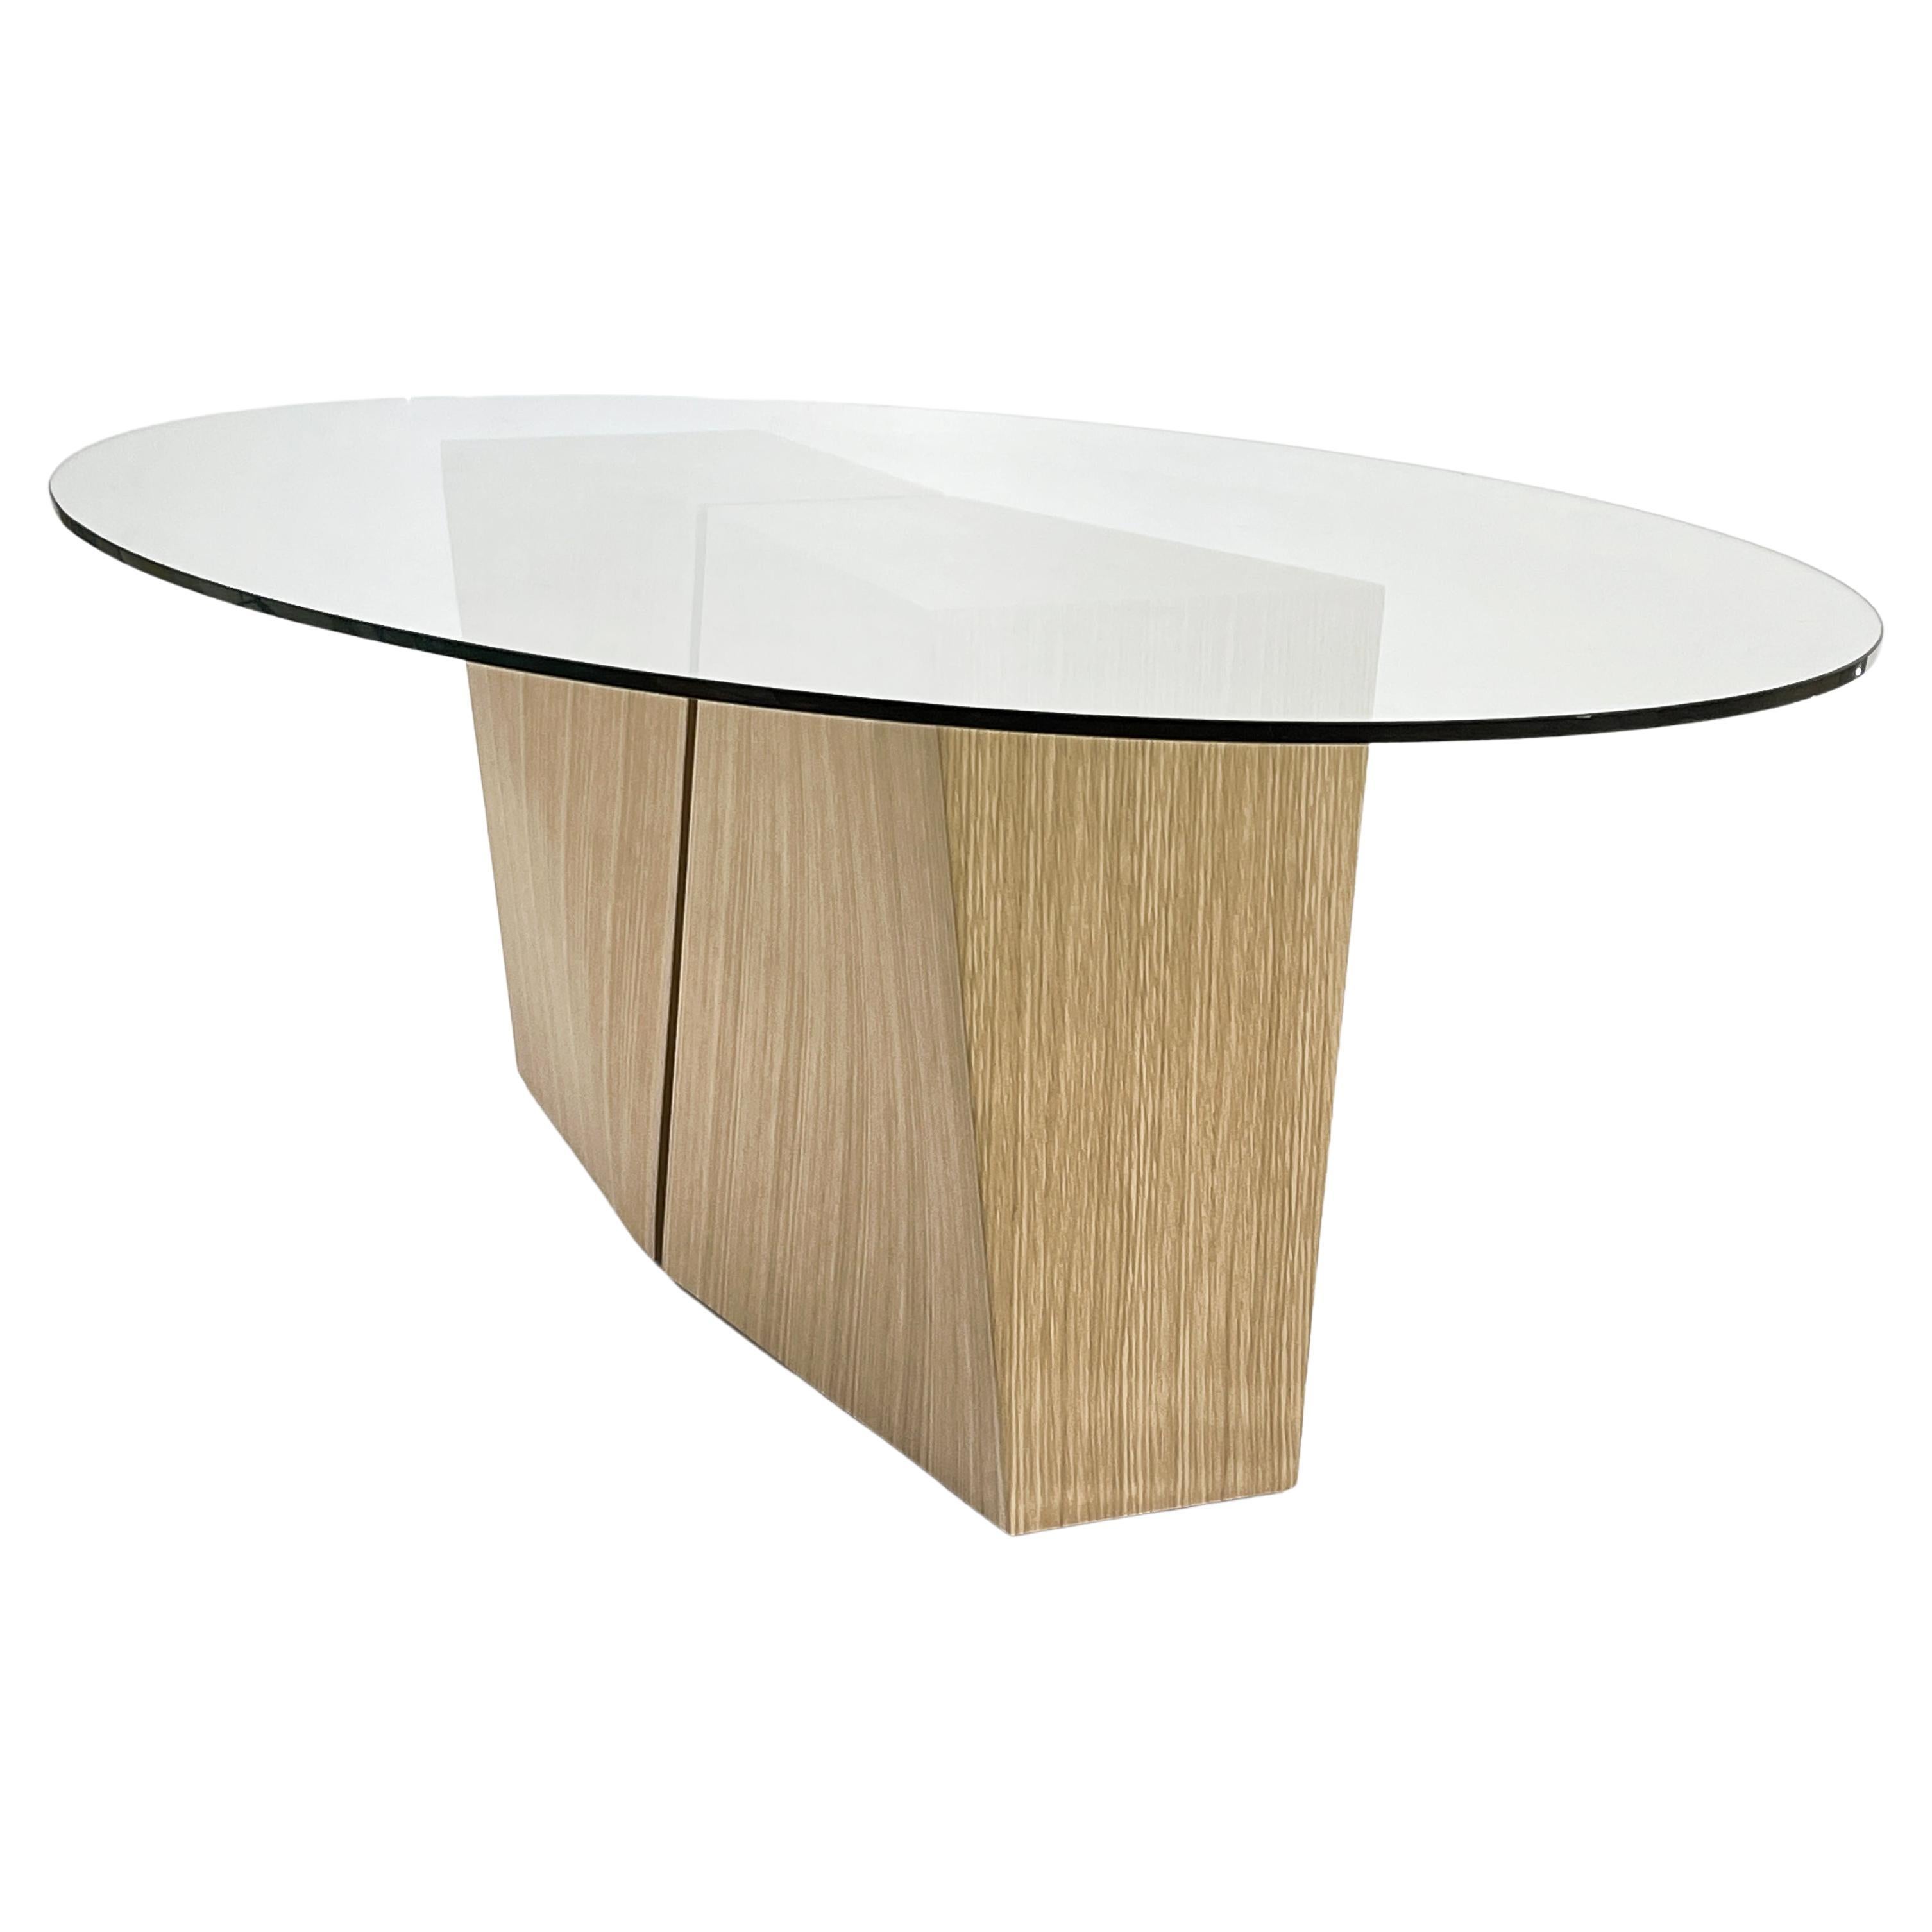 William Earle's Aan and Aix dining table. A modernist favorite since 2002.